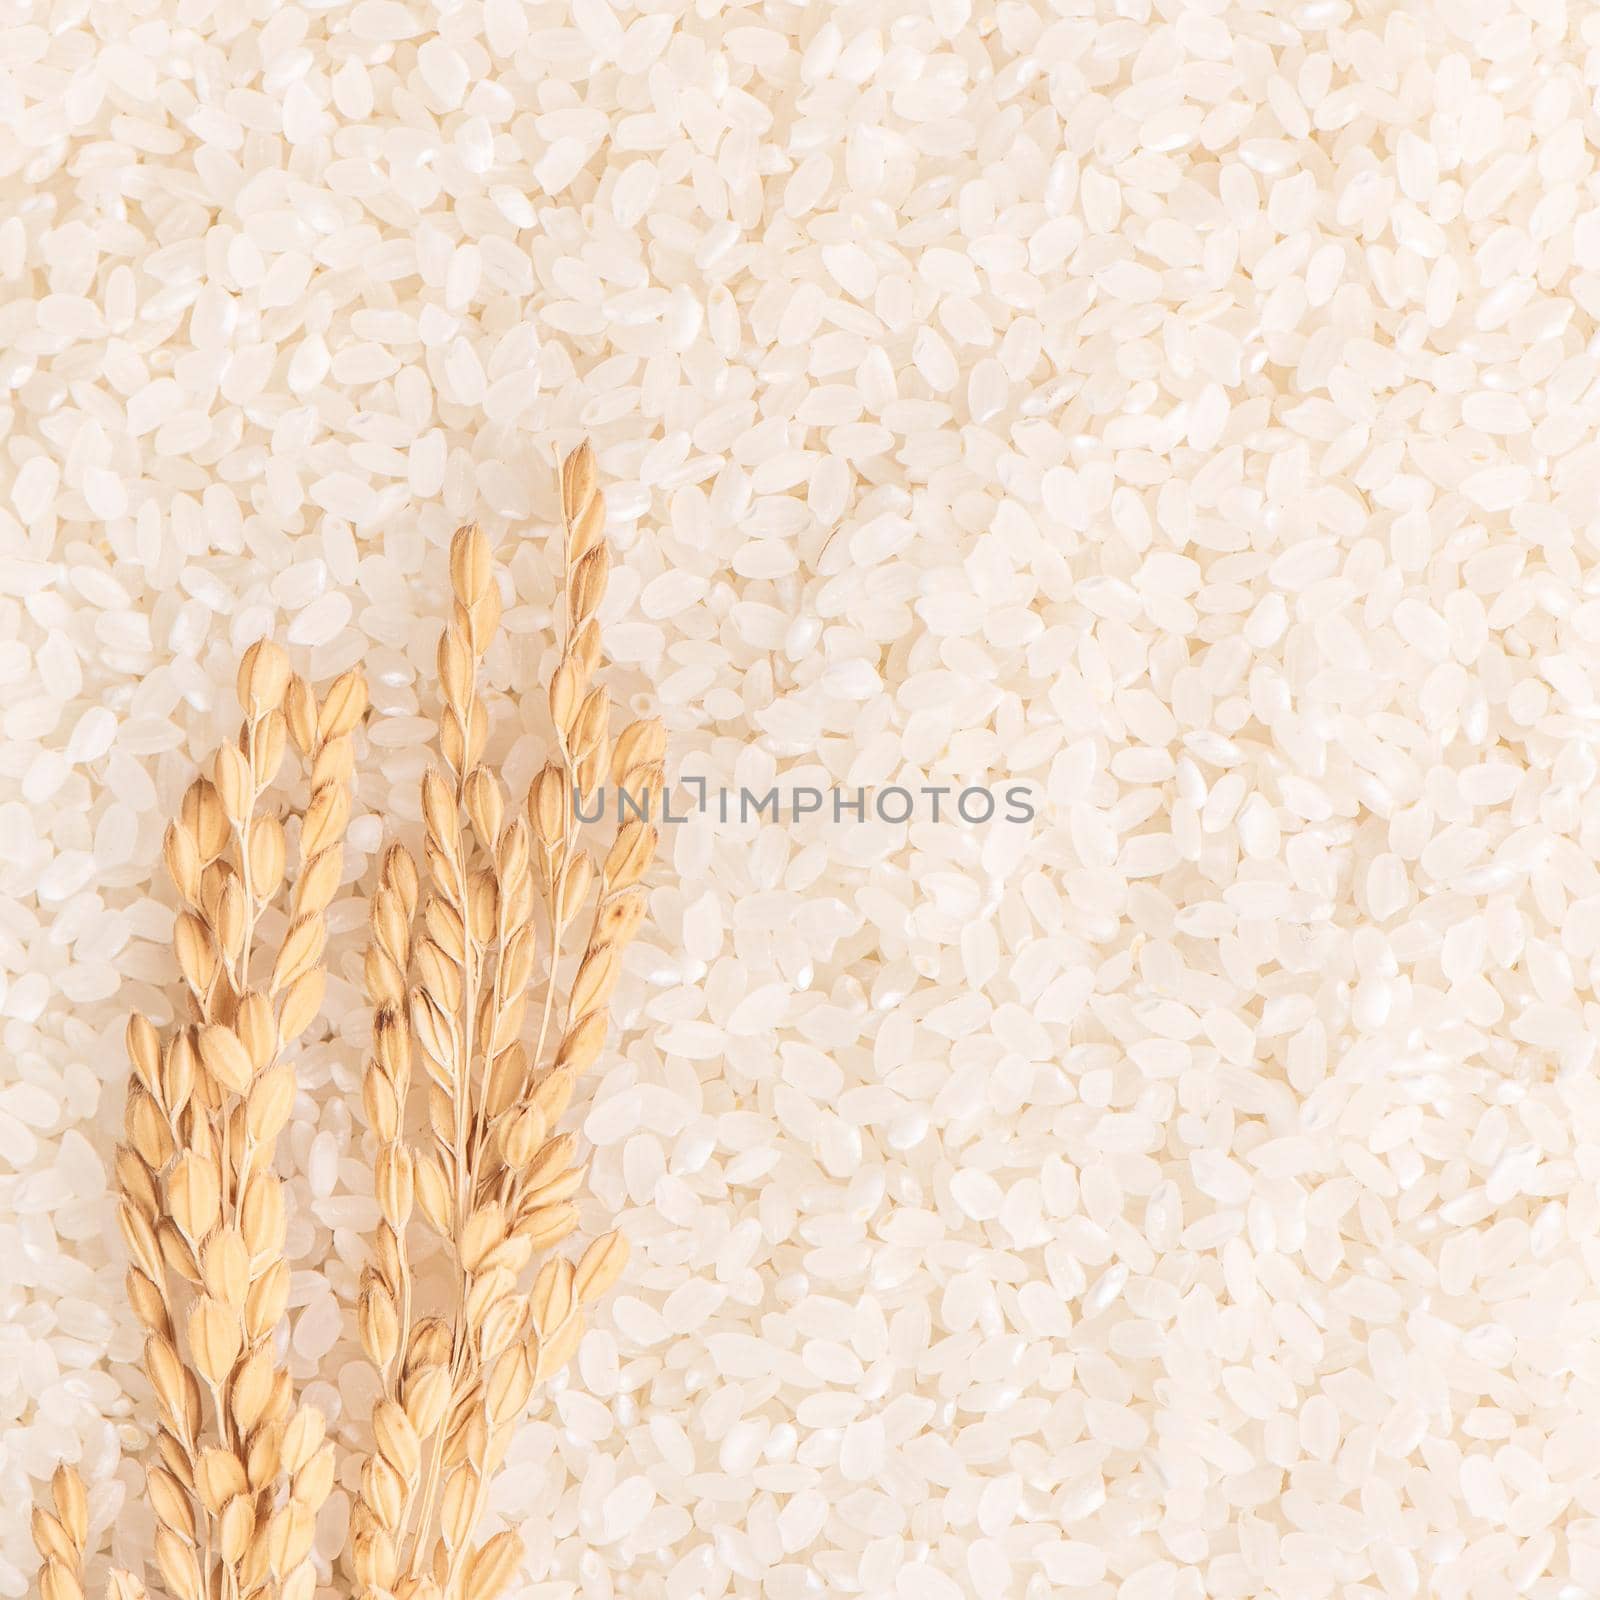 Raw white polished milled edible rice crop on white background in brown bowl, organic agriculture design concept. Staple food of Asia, close up. by ROMIXIMAGE